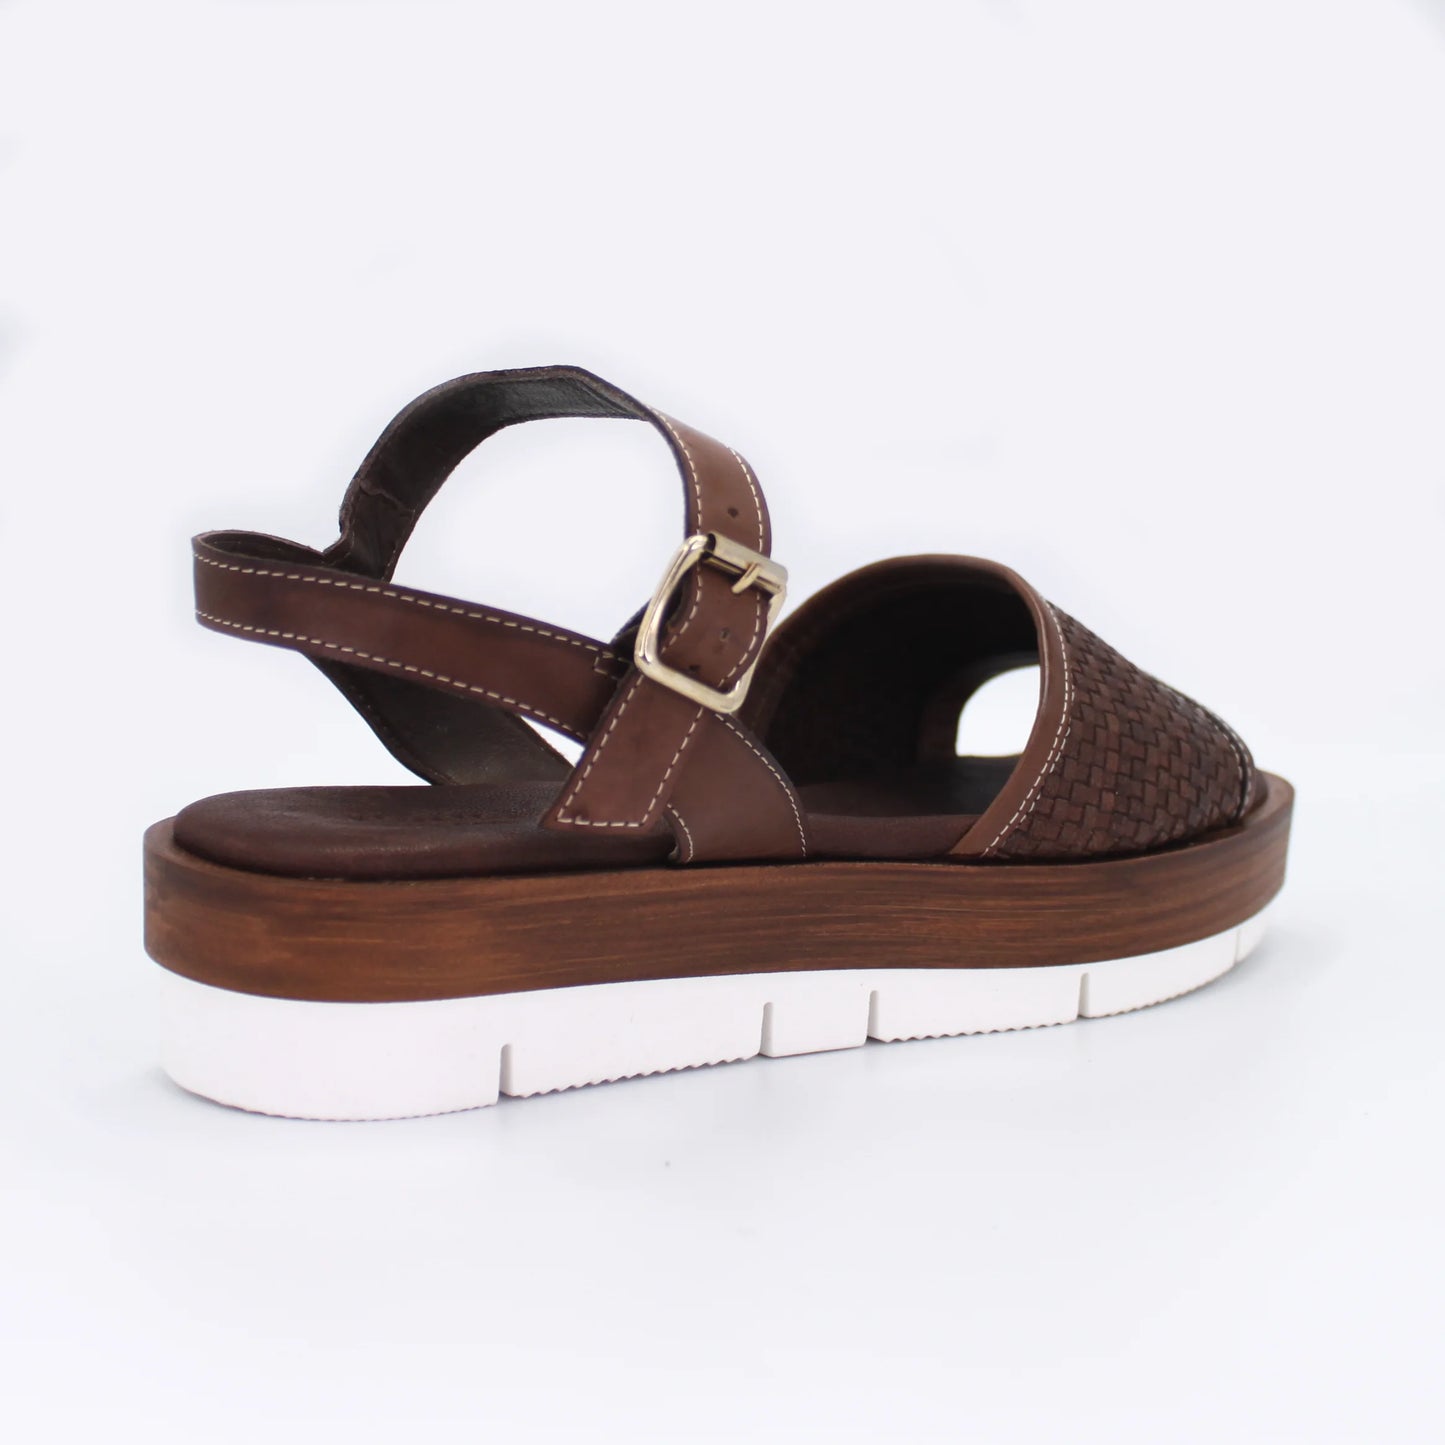 Shop Handmade Italian Leather Strap Sandal in Tabacco Brown (13030) or browse our range of hand-made Italian sandals for women in leather or suede in-store at Aliverti Durban or Cape Town, or shop online. We deliver in South Africa & offer multiple payment plans as well as accept multiple safe & secure payment methods.